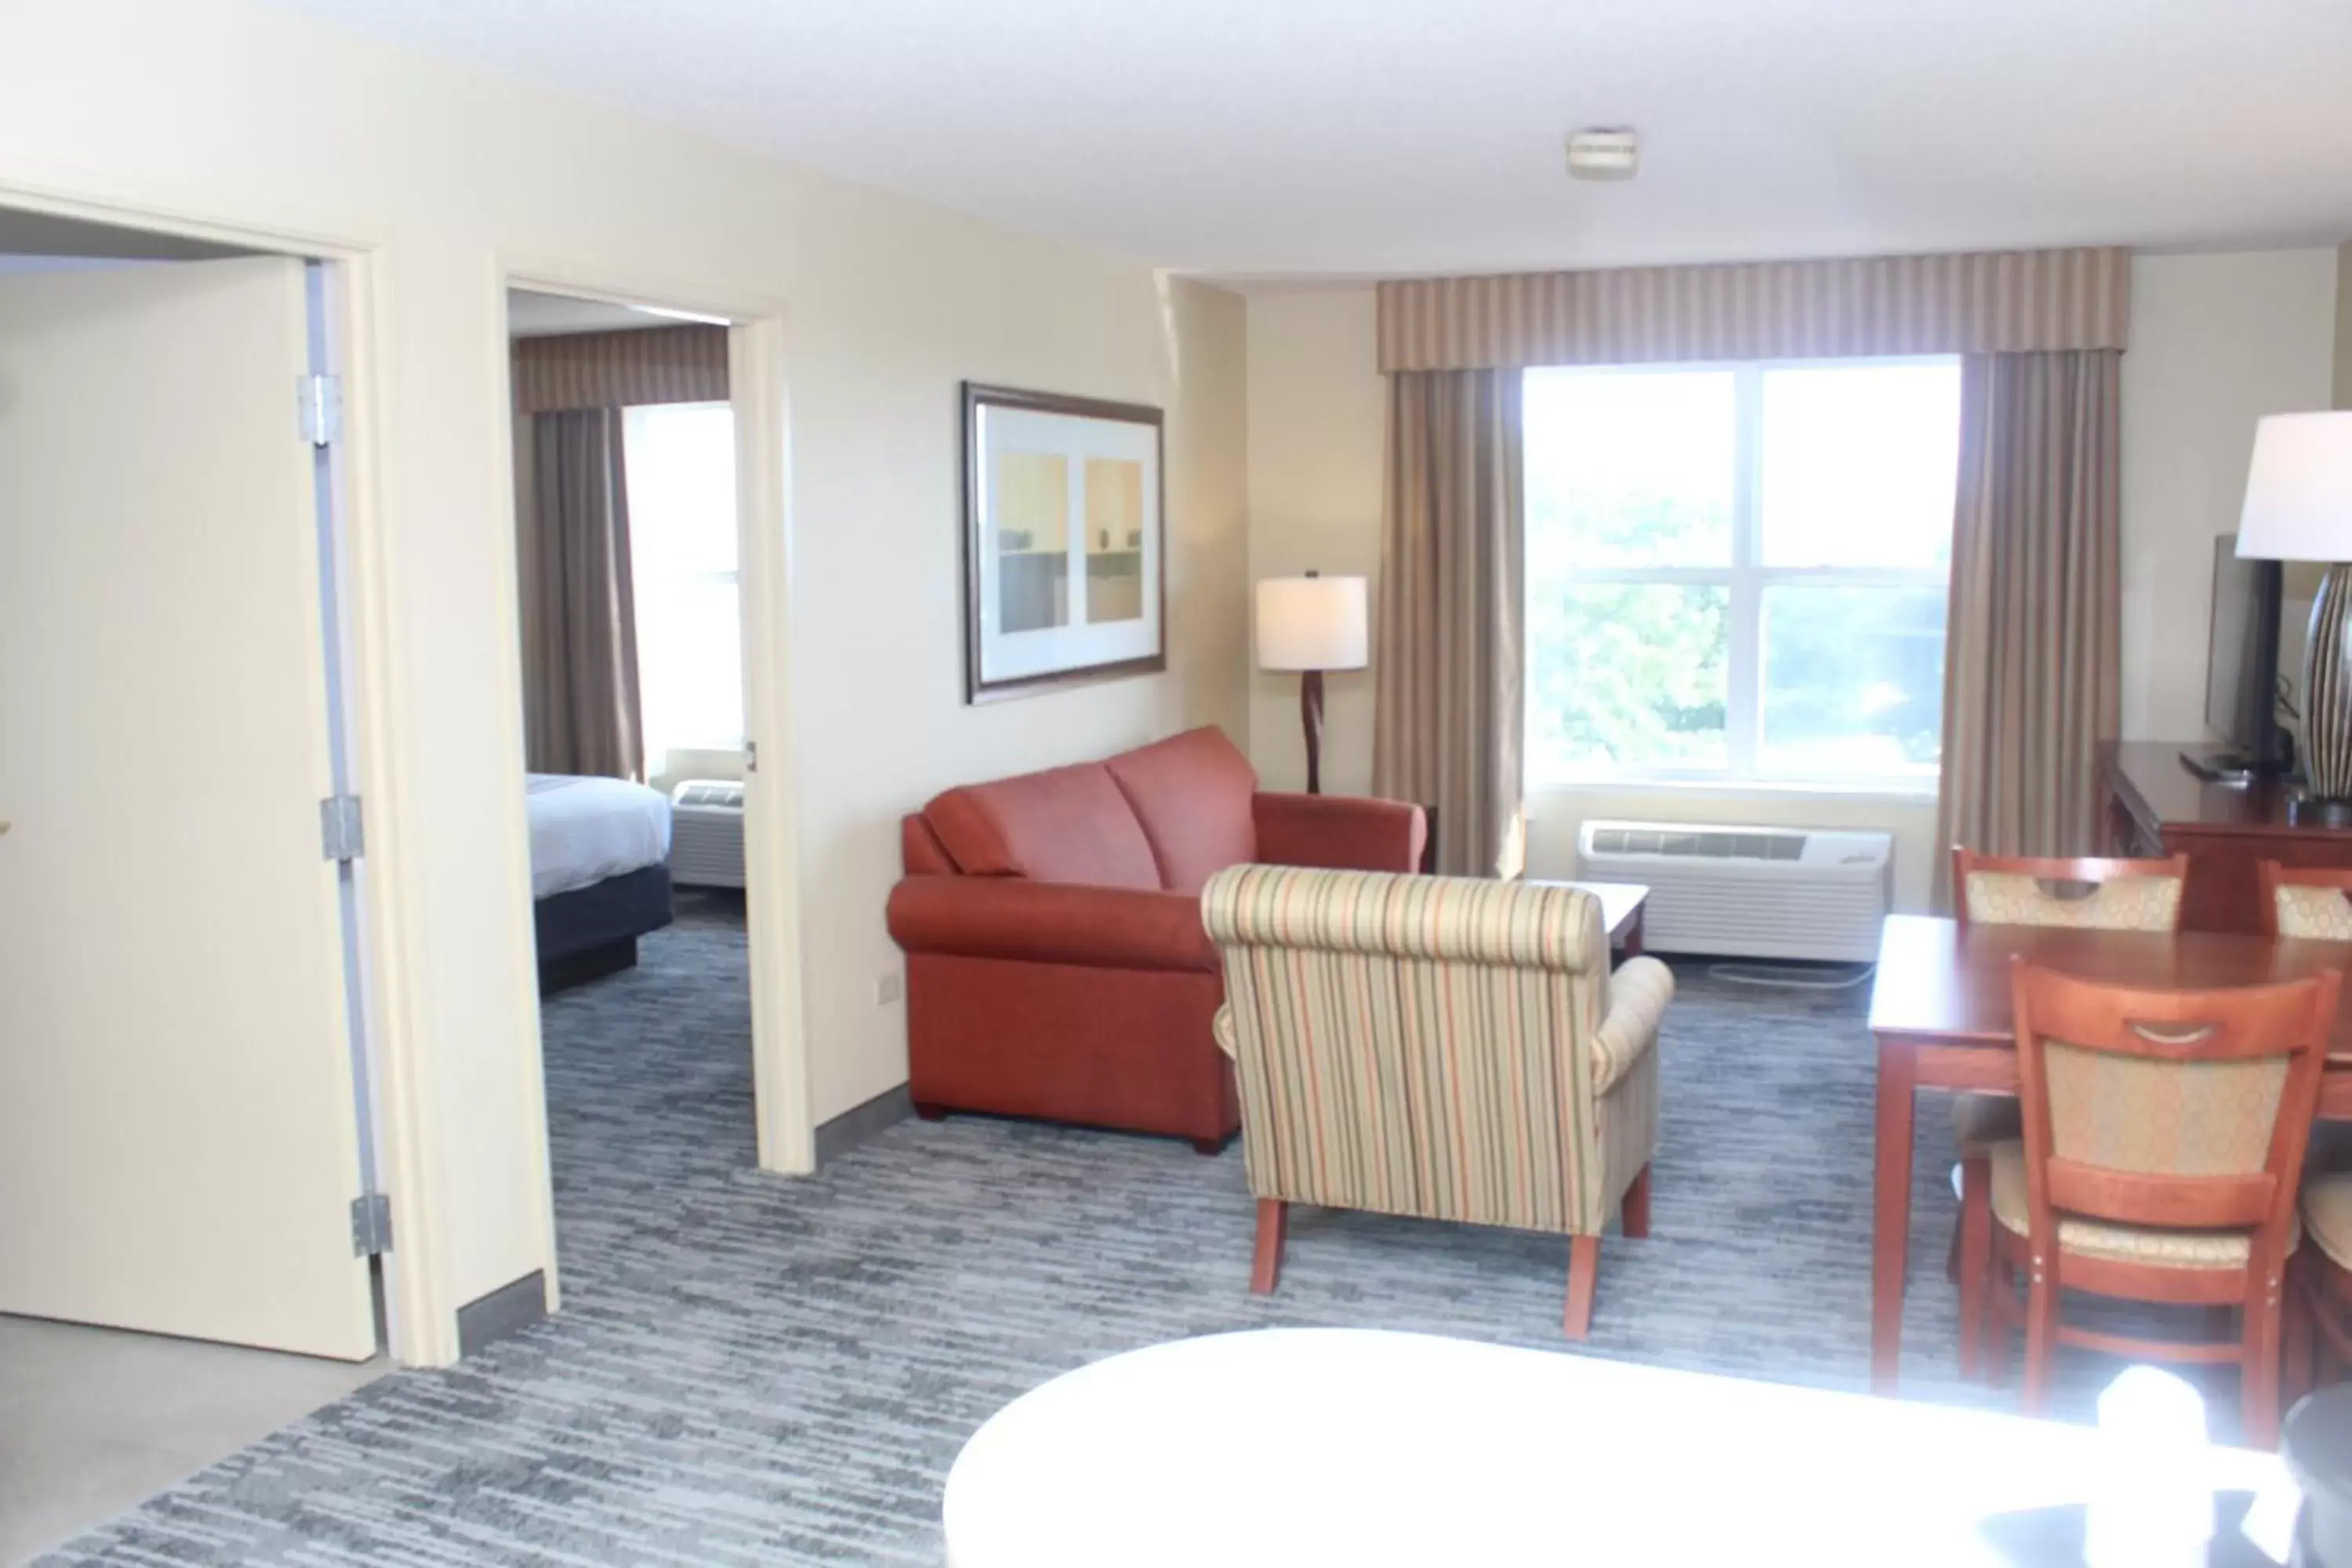 Seating Area in Country Inn & Suites by Radisson, Crystal Lake, IL